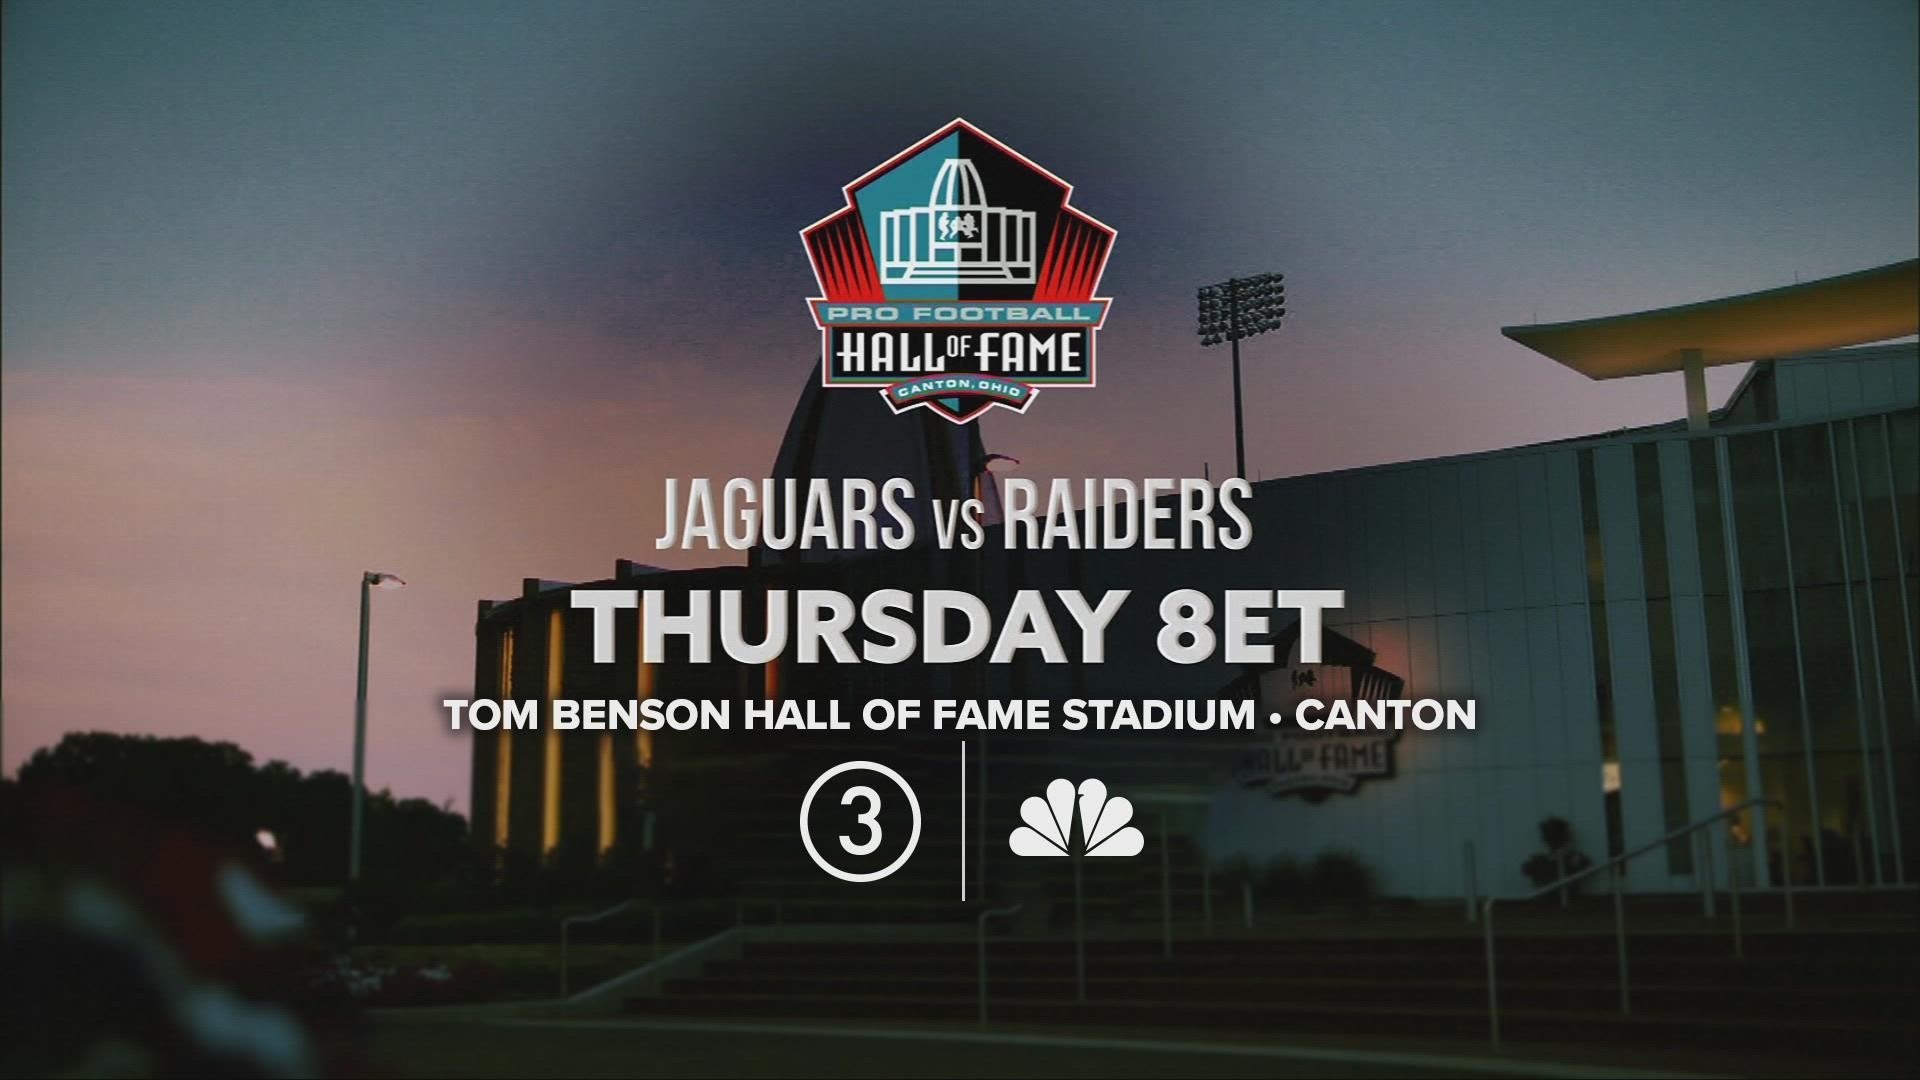 The 2022 Pro Football Hall of Fame Game will take place in Canton on Thursday night.